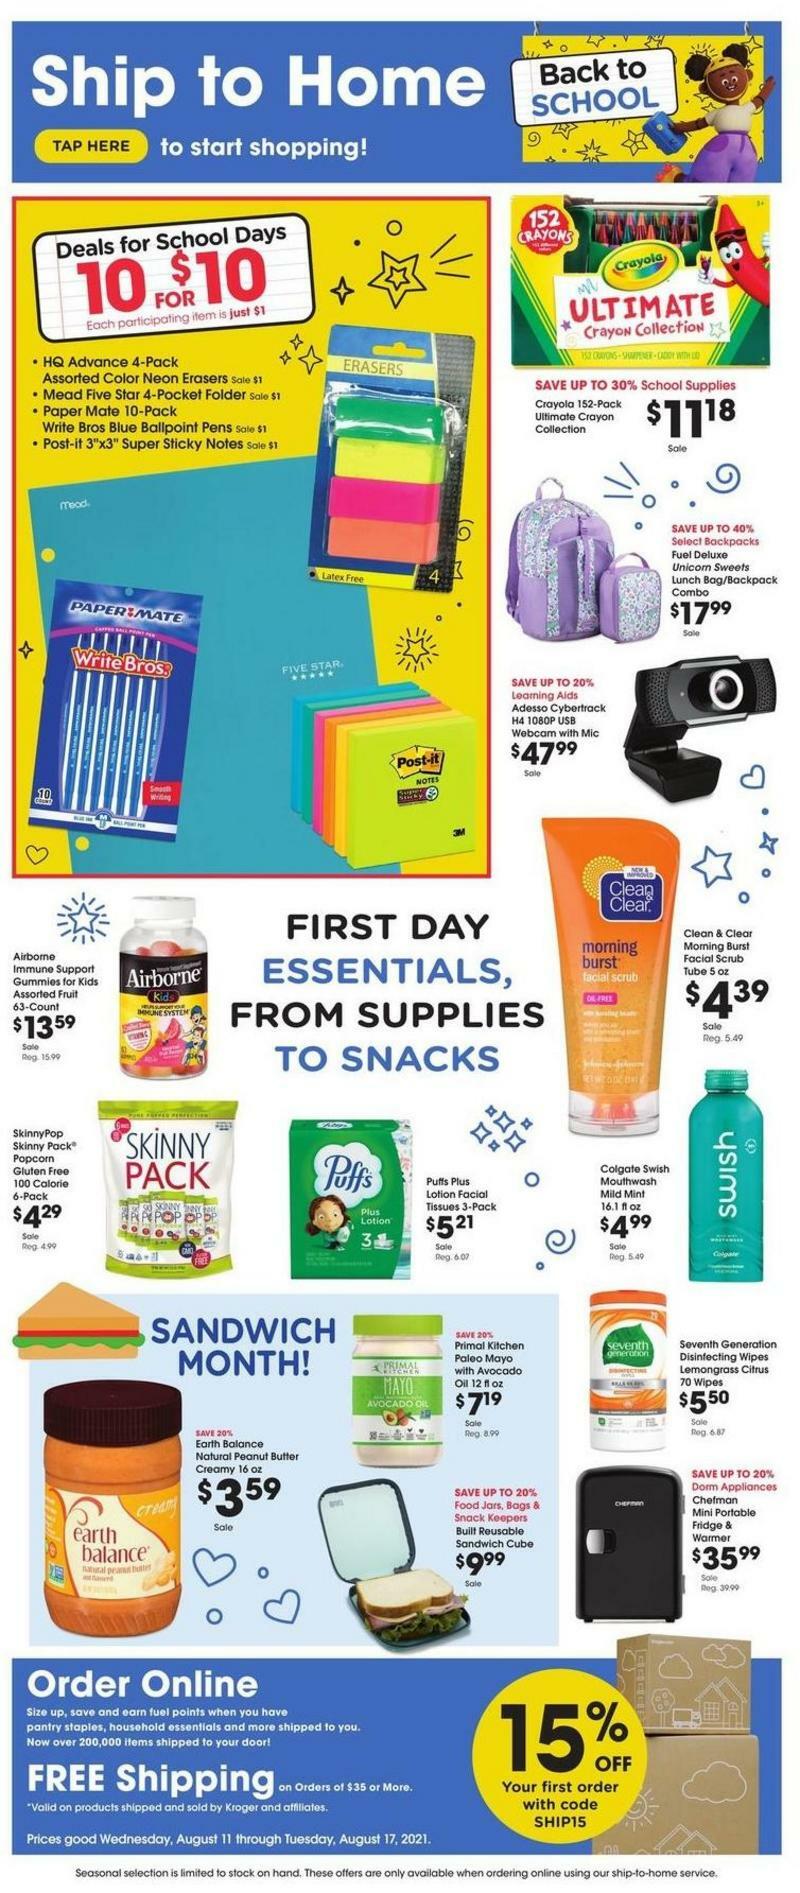 Kroger Ship to Home Weekly Ad from August 11